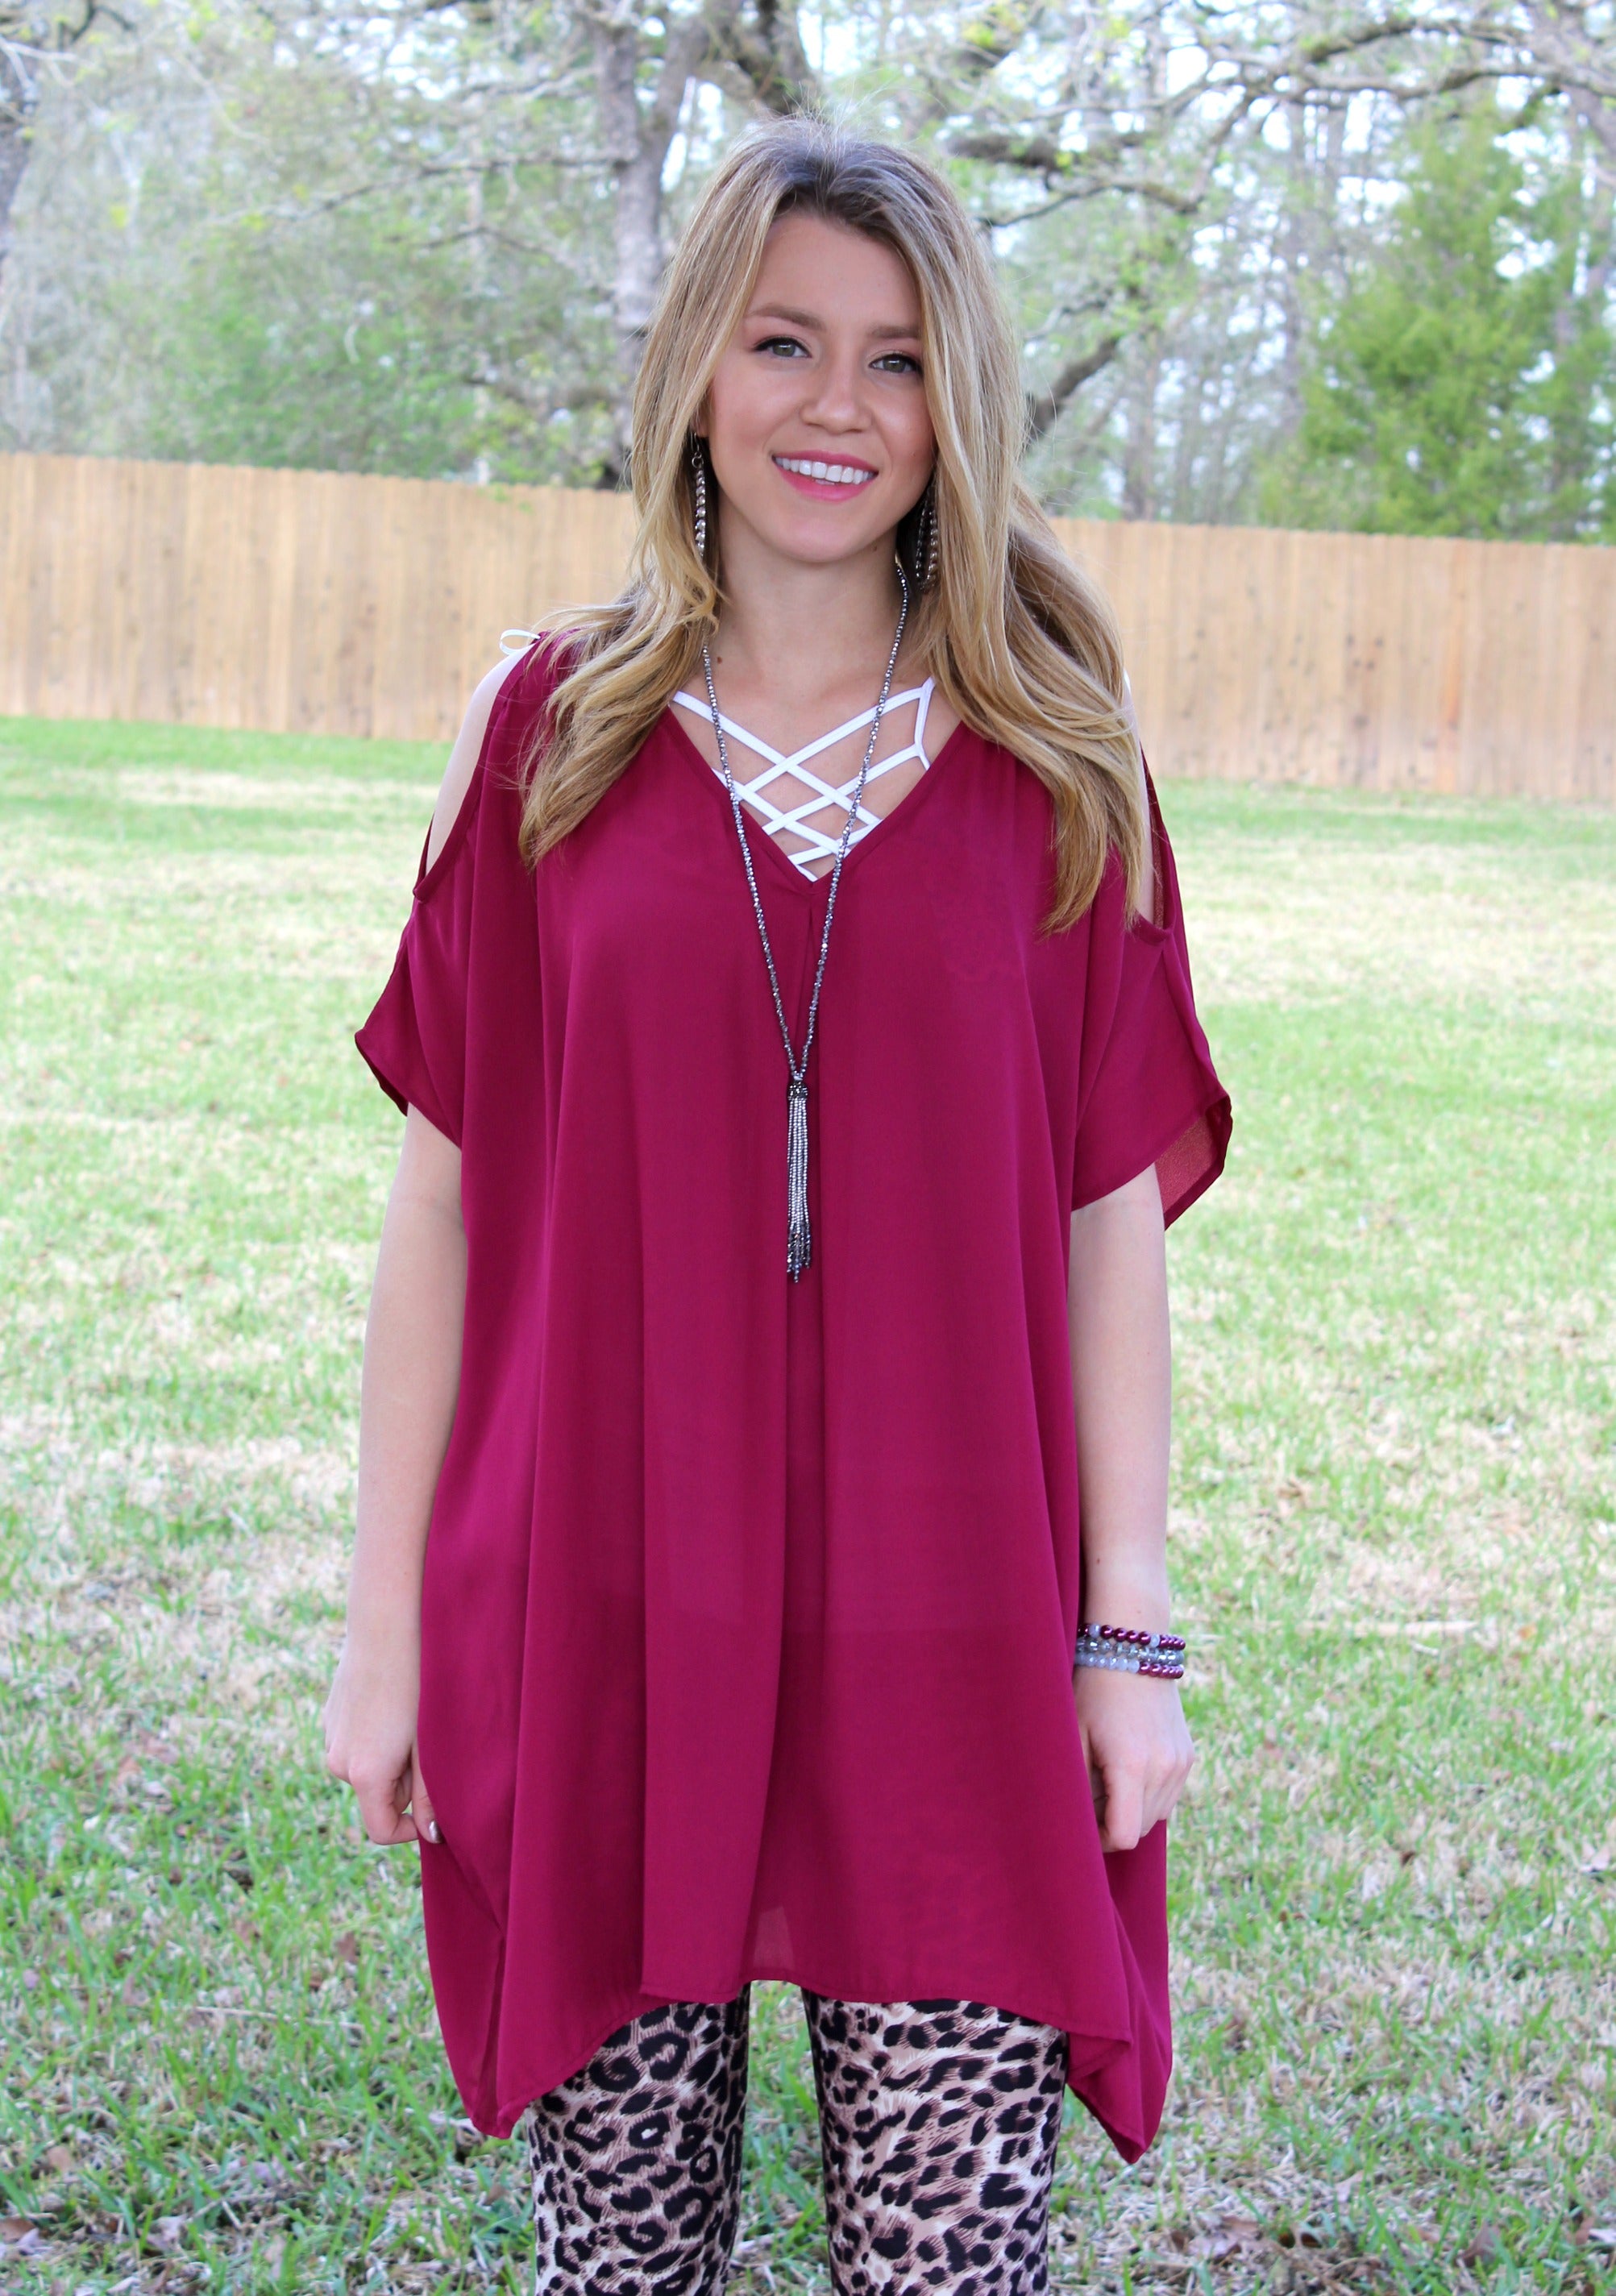 Pretty Little Thing Sheer Open Shoulder Tunic in Maroon - Giddy Up Glamour Boutique